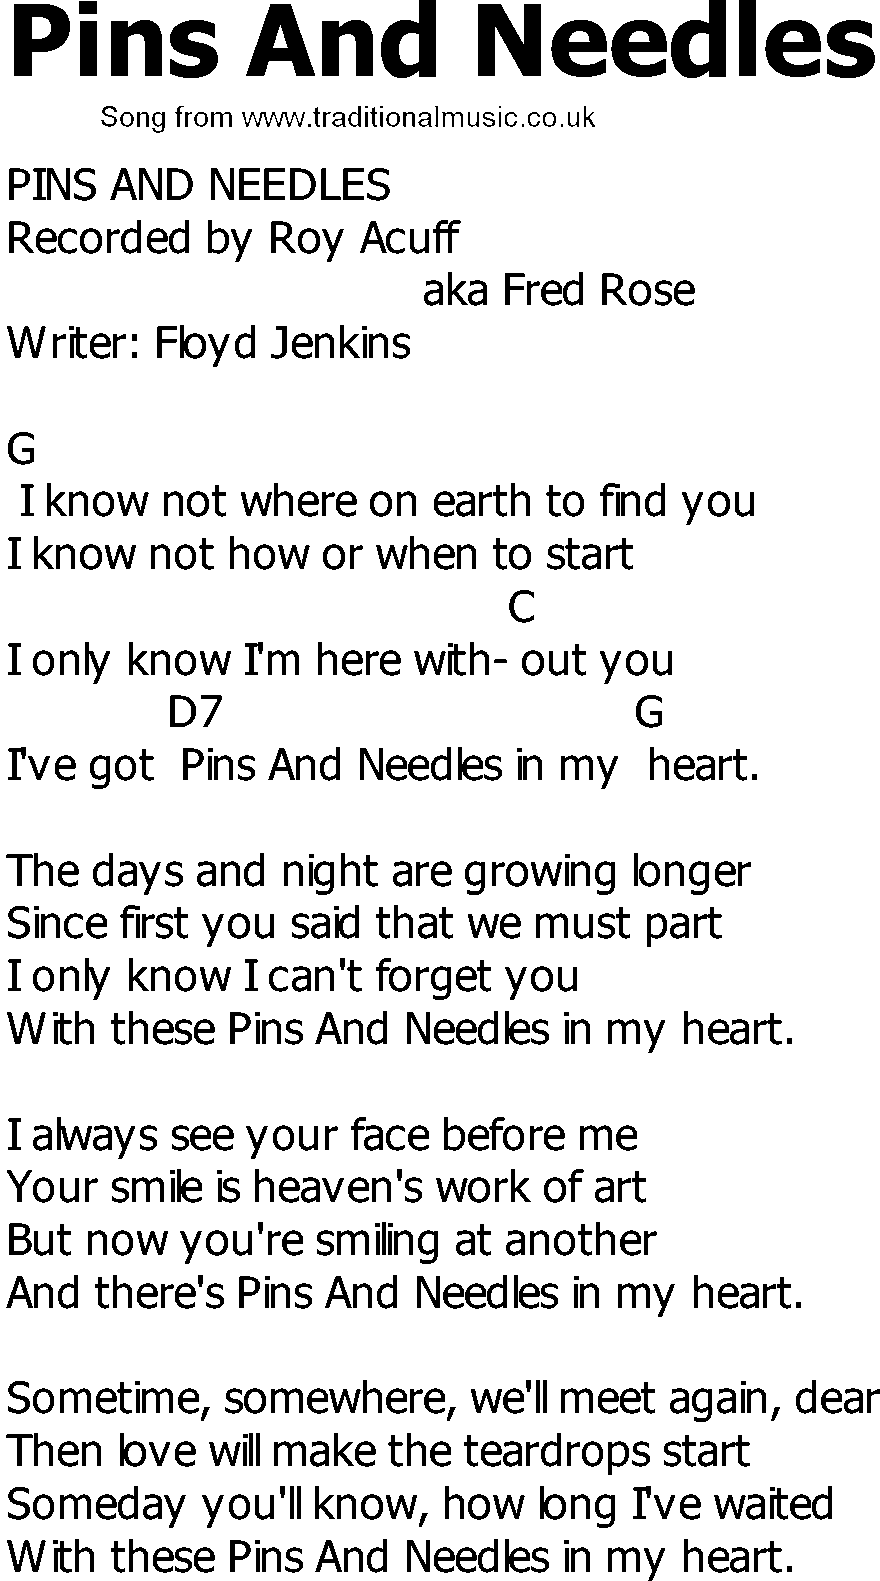 Old Country song lyrics with chords - Pins And Needles